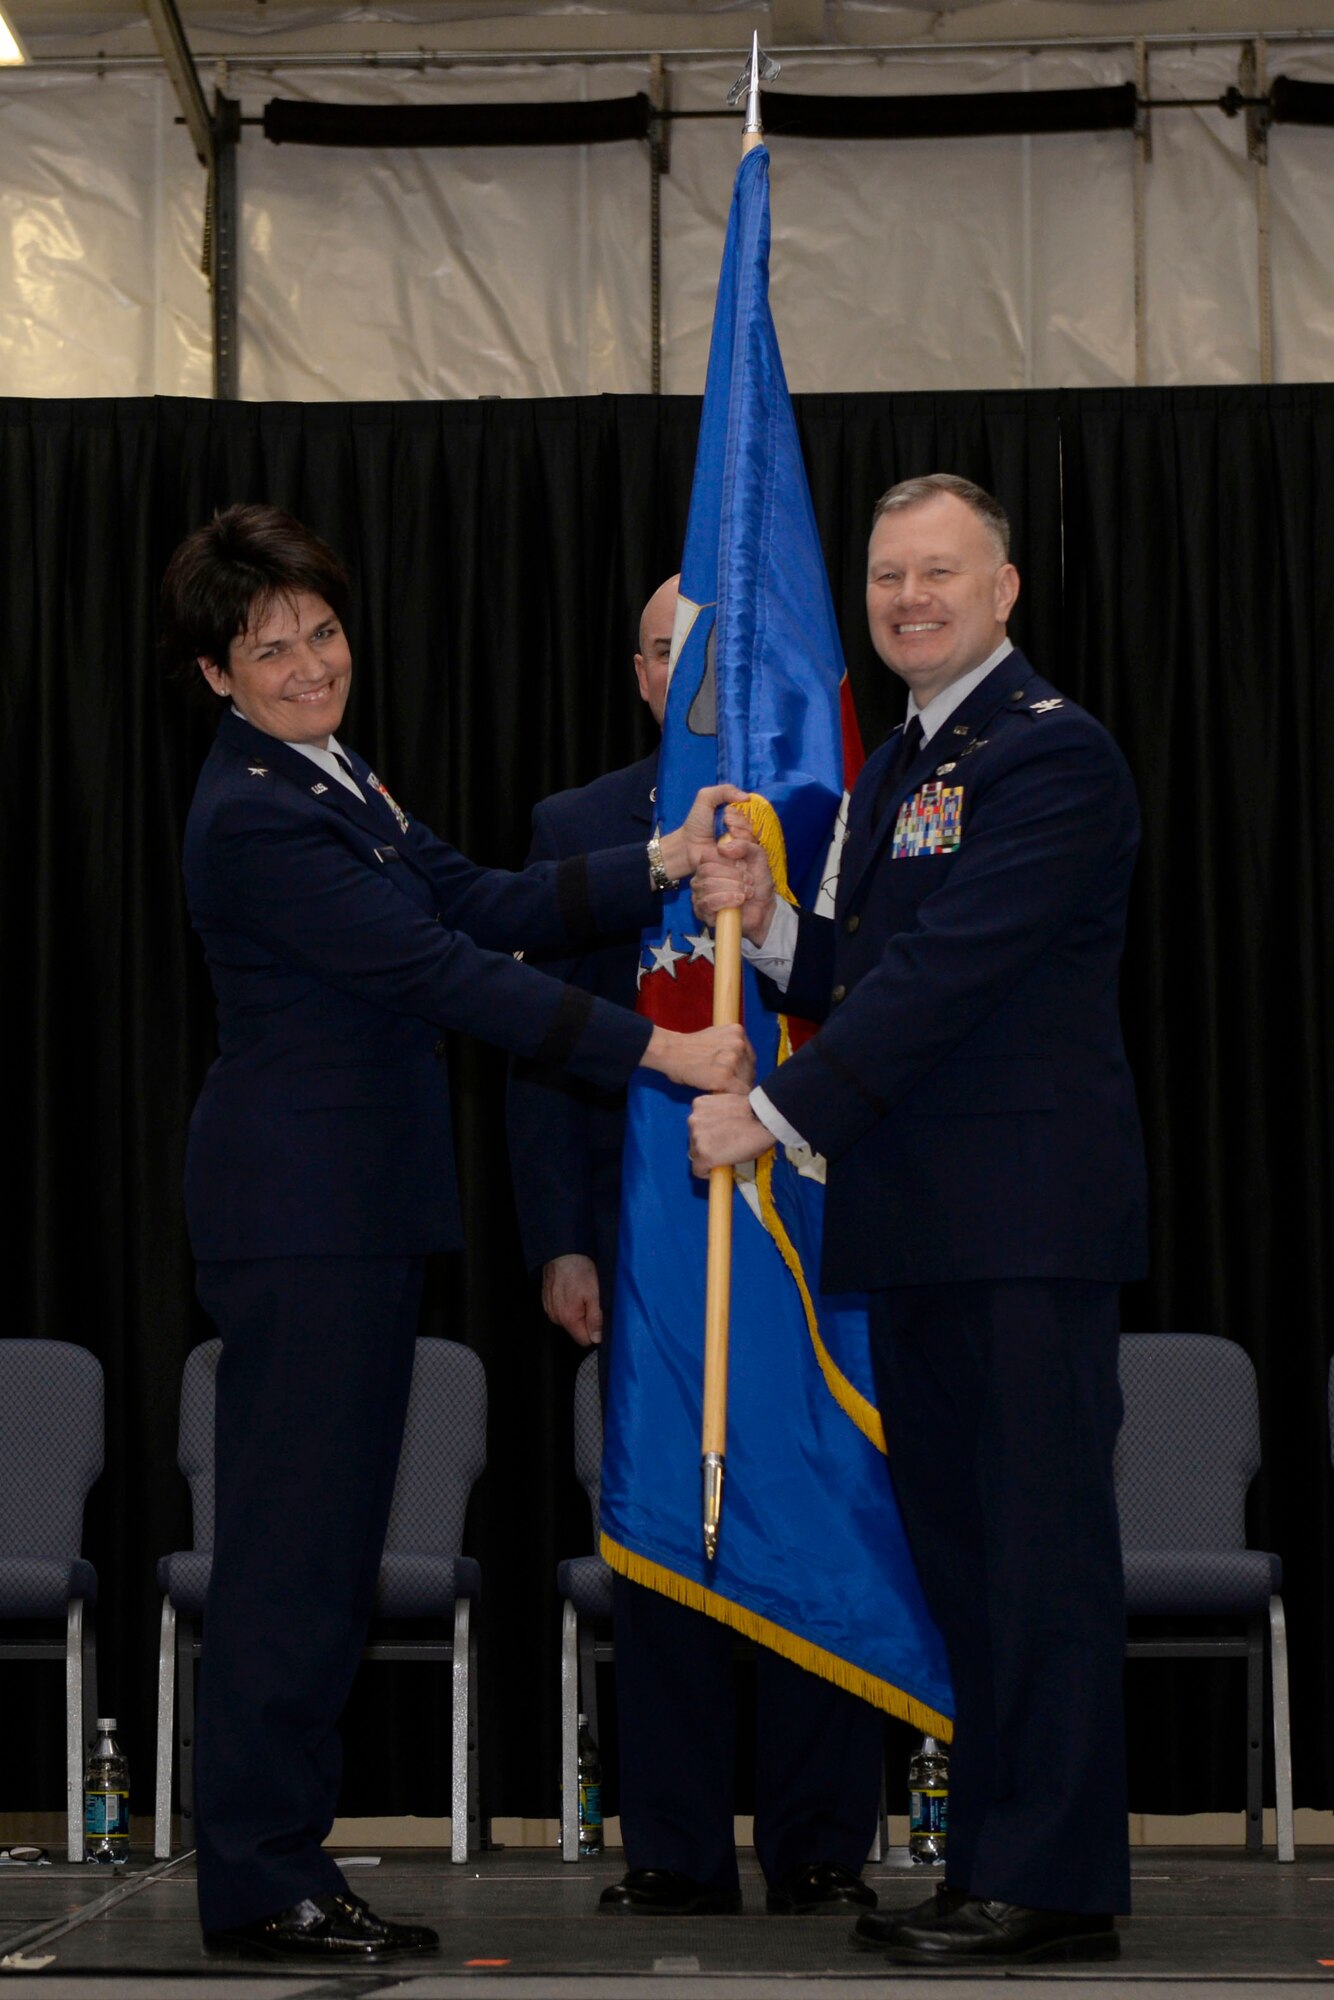 Col. John W. Pogorek (right) accepts the 157th Air Refueling Wing guidon from Brig. Gen. Laurie M. Farris during a change of command ceremony at Pease Air National Guard Base, N.H., March 10, 2018. The change of commmand cermony represents a formal transfer of authority and responsibility from an outgoing commander to the incoming commander.(N.H. Air National Guard photo by Senior Airman Taylor Queen)